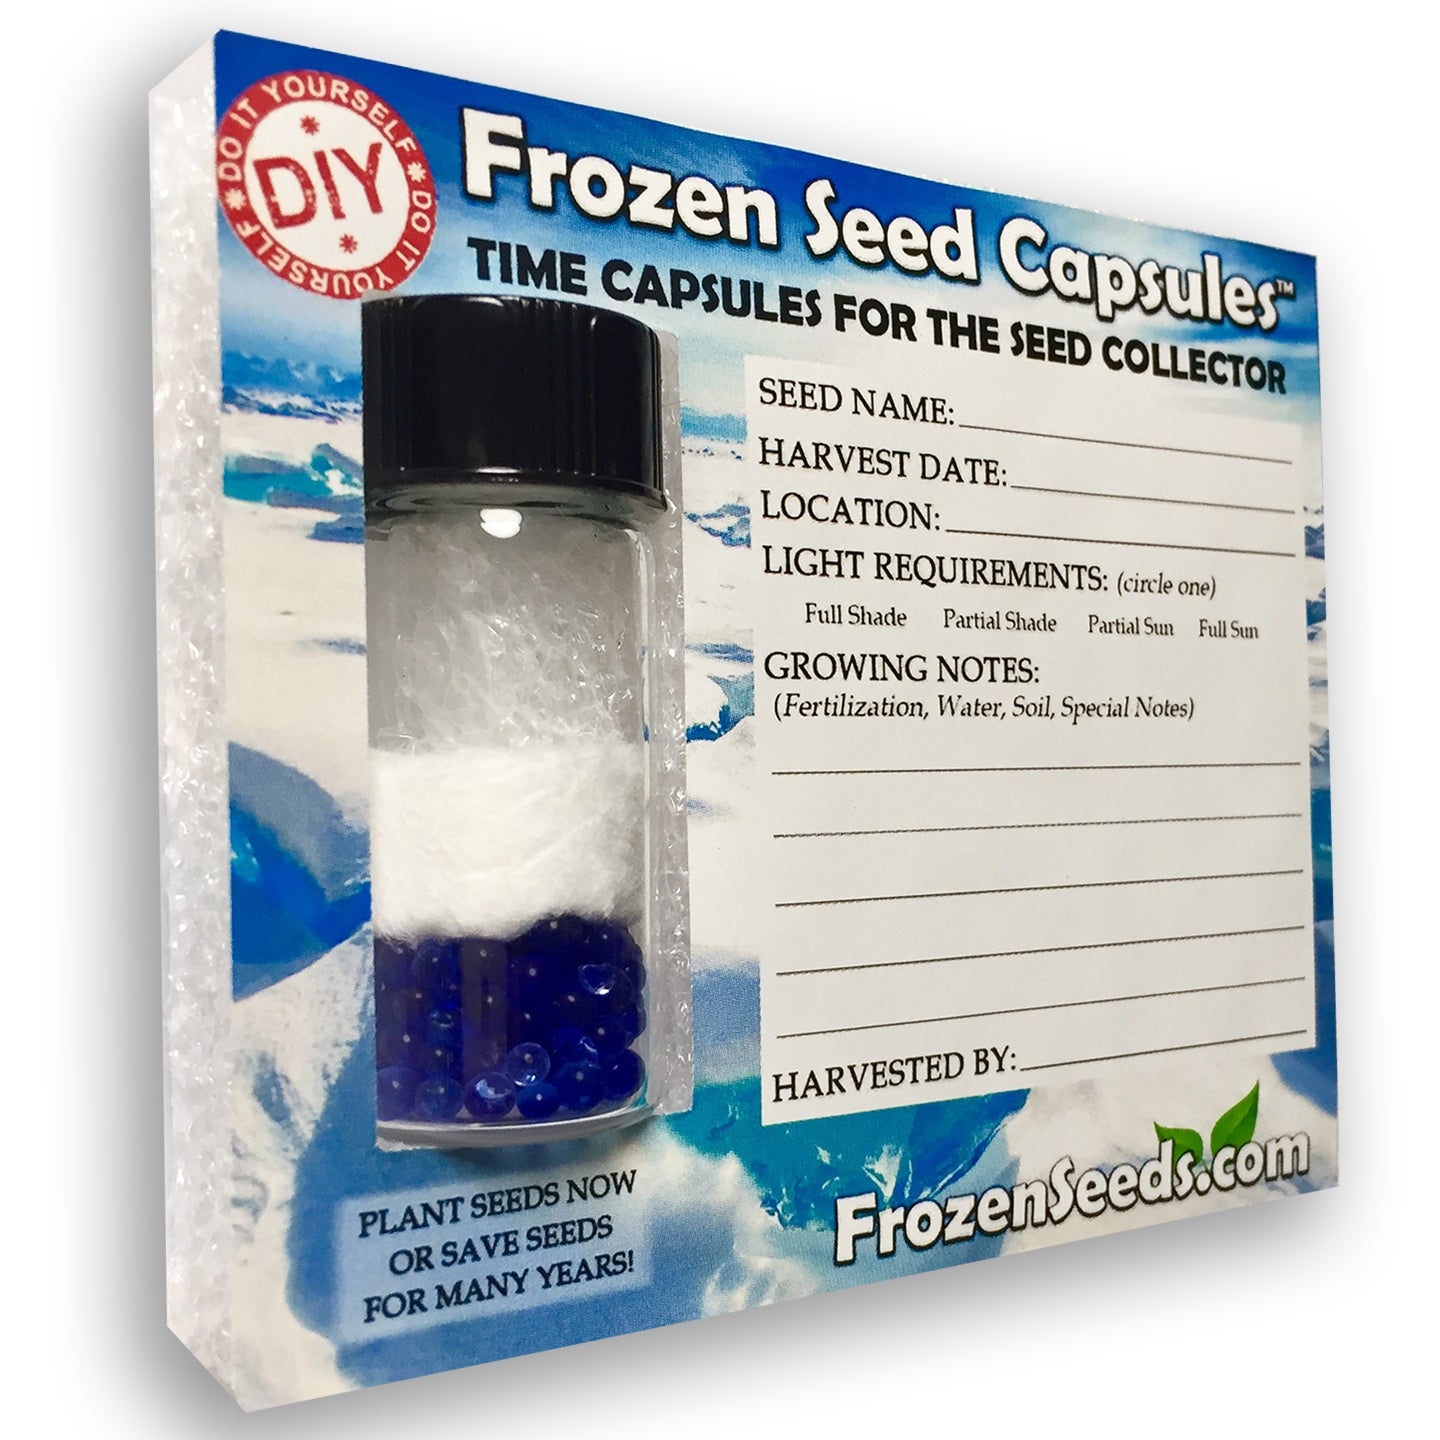 Frozen Seed Capsules™ 'Do-It-Yourself' DIY Medium Seed Storage Capsules - Ideal for Small Seeds - The Very Best in Proper Long-term Seed Storage